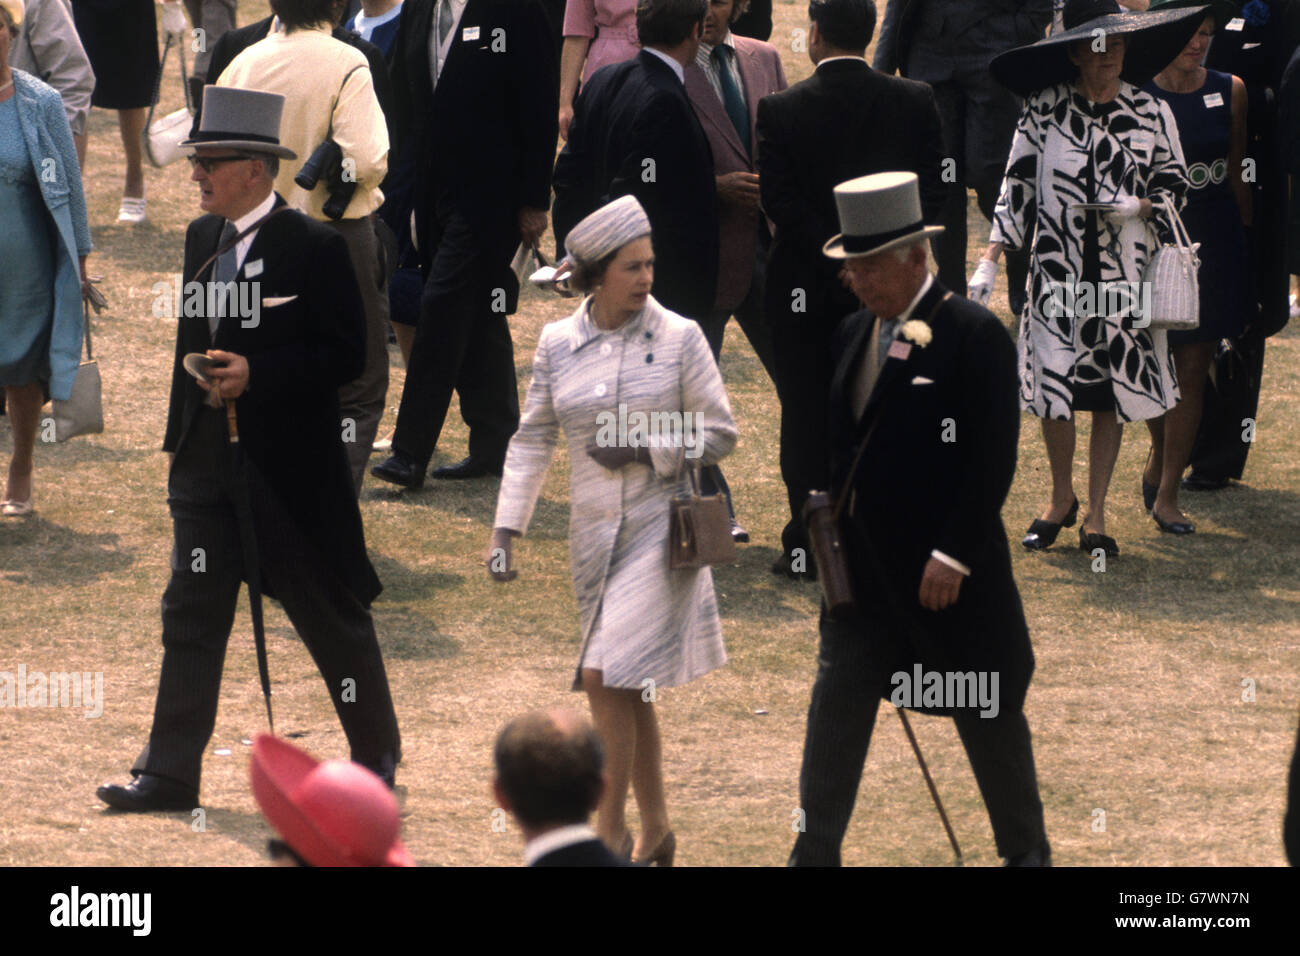 Horse Racing - Royal Ascot - Ascot Racecourse. The Queen and the Duke of Norfolk at Royal Ascot. Stock Photo